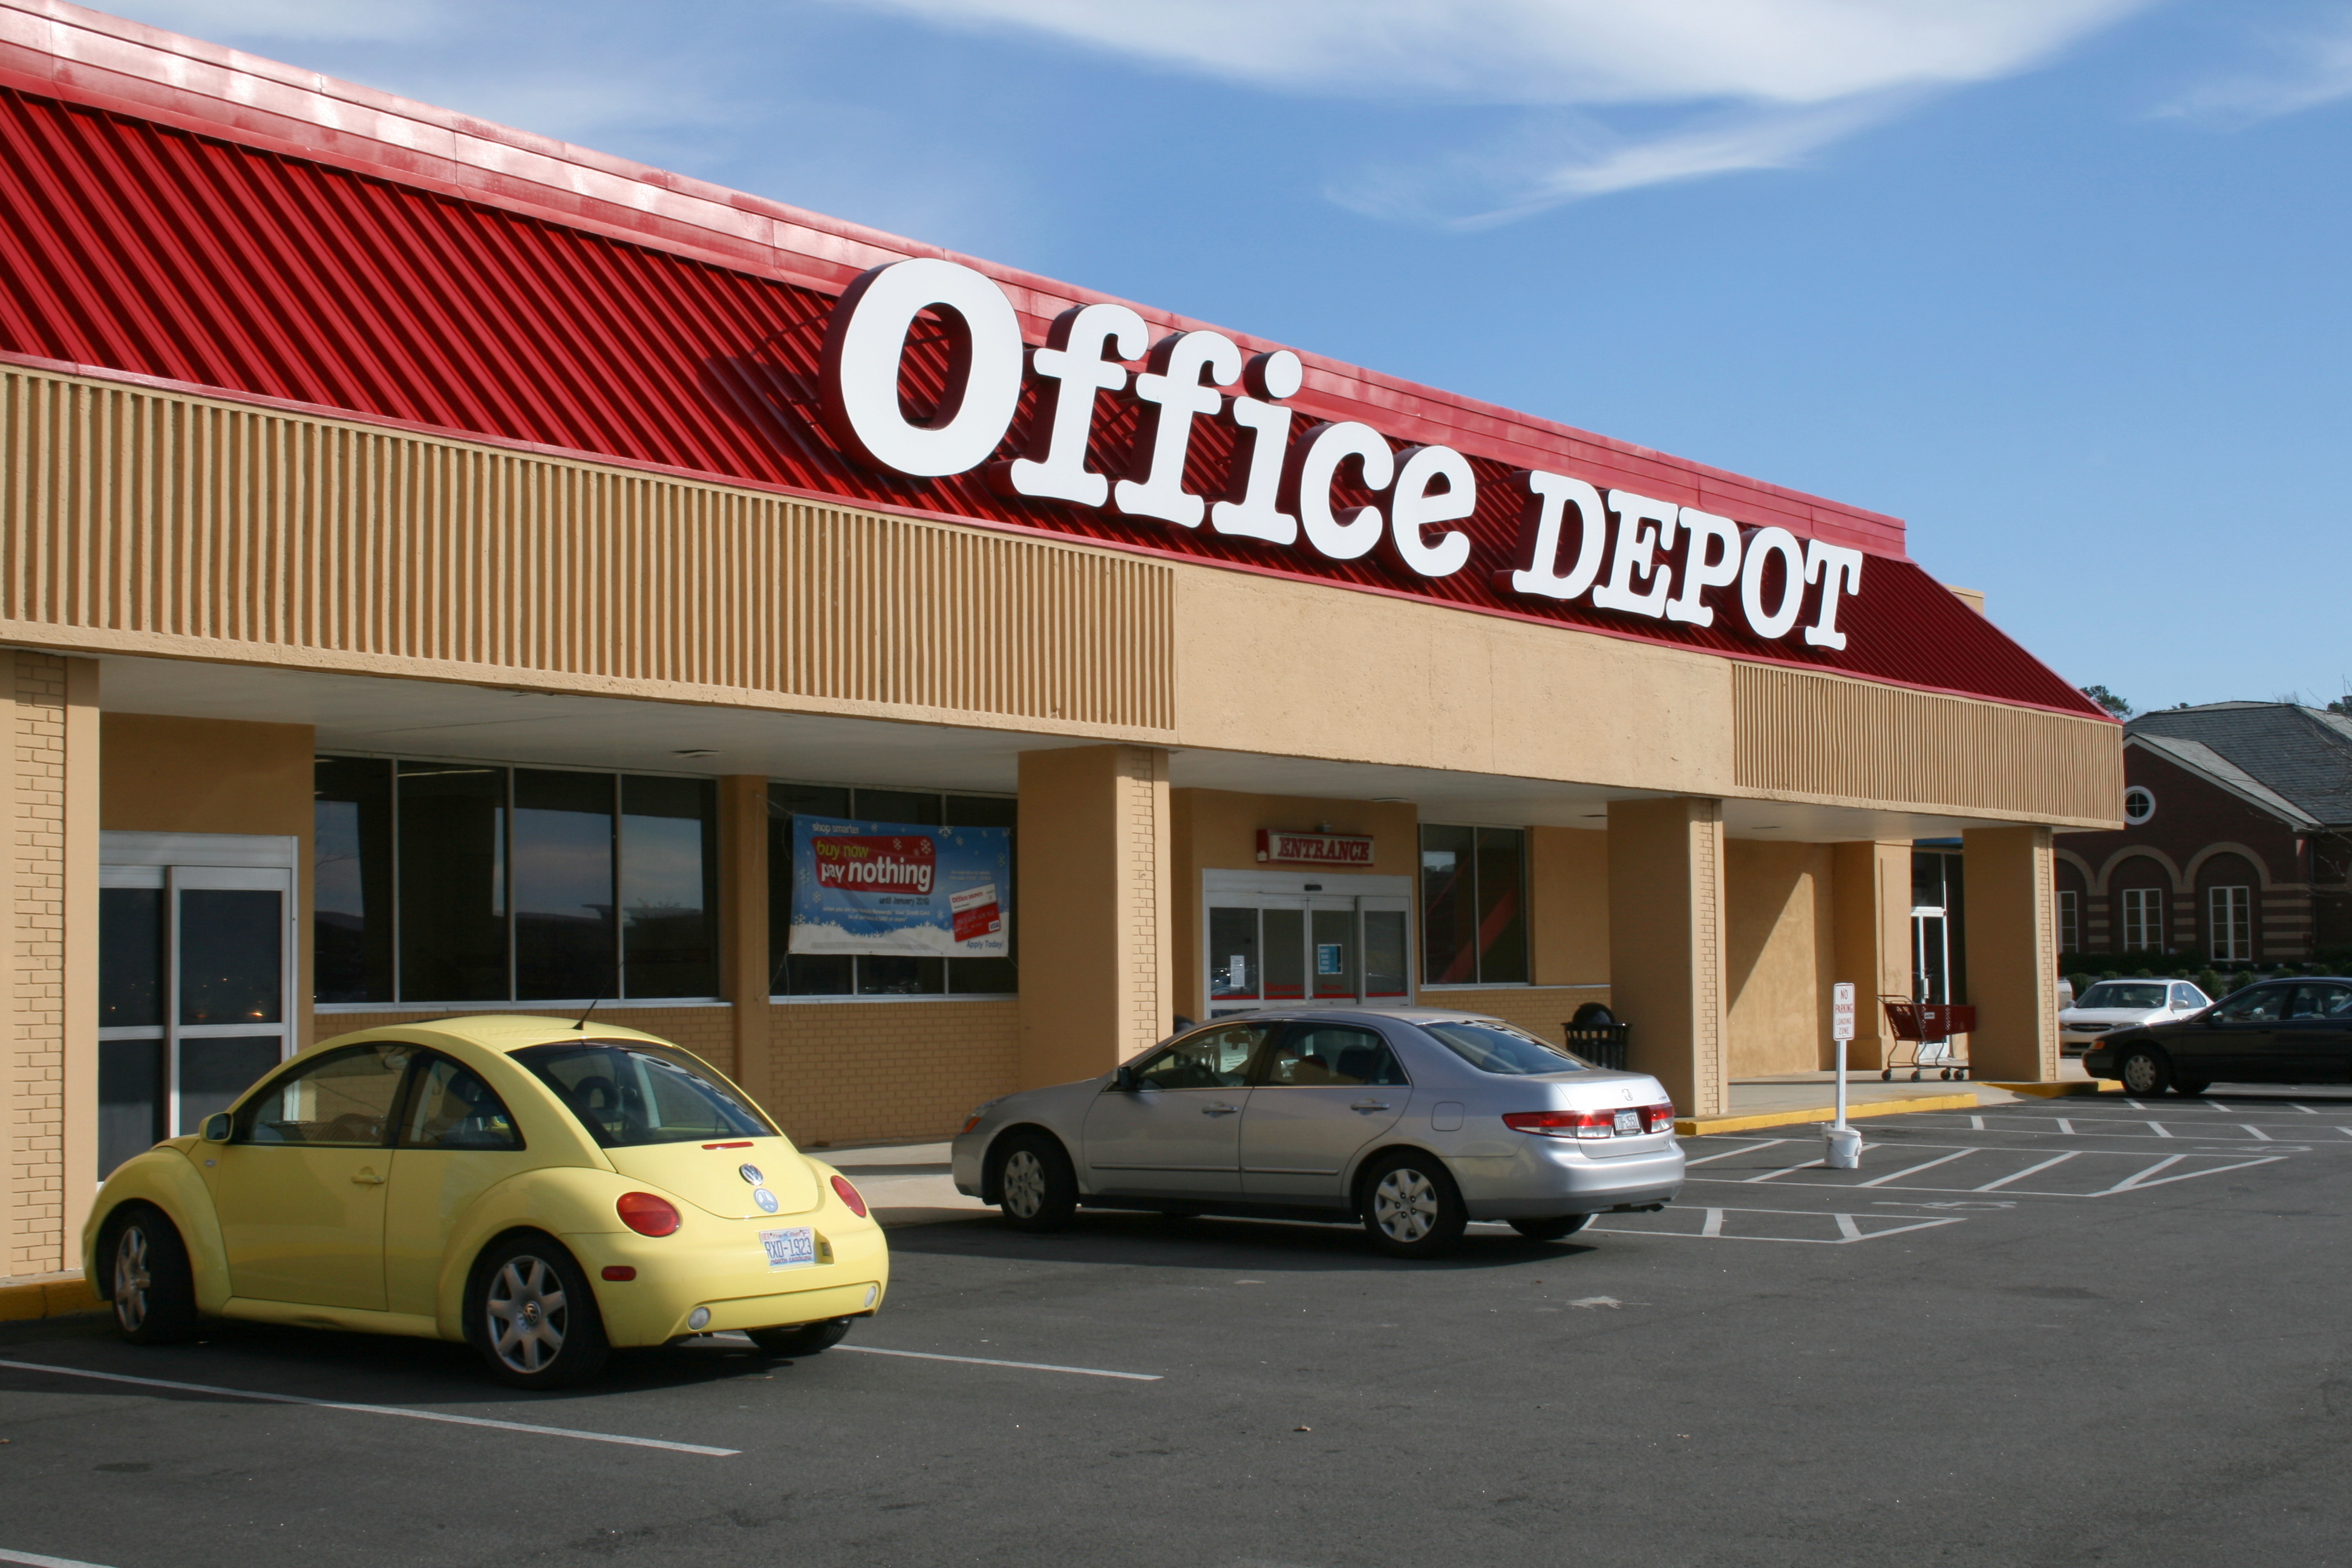 Office Depot in Illinois refuses to print pro-life flyers, Thomas More